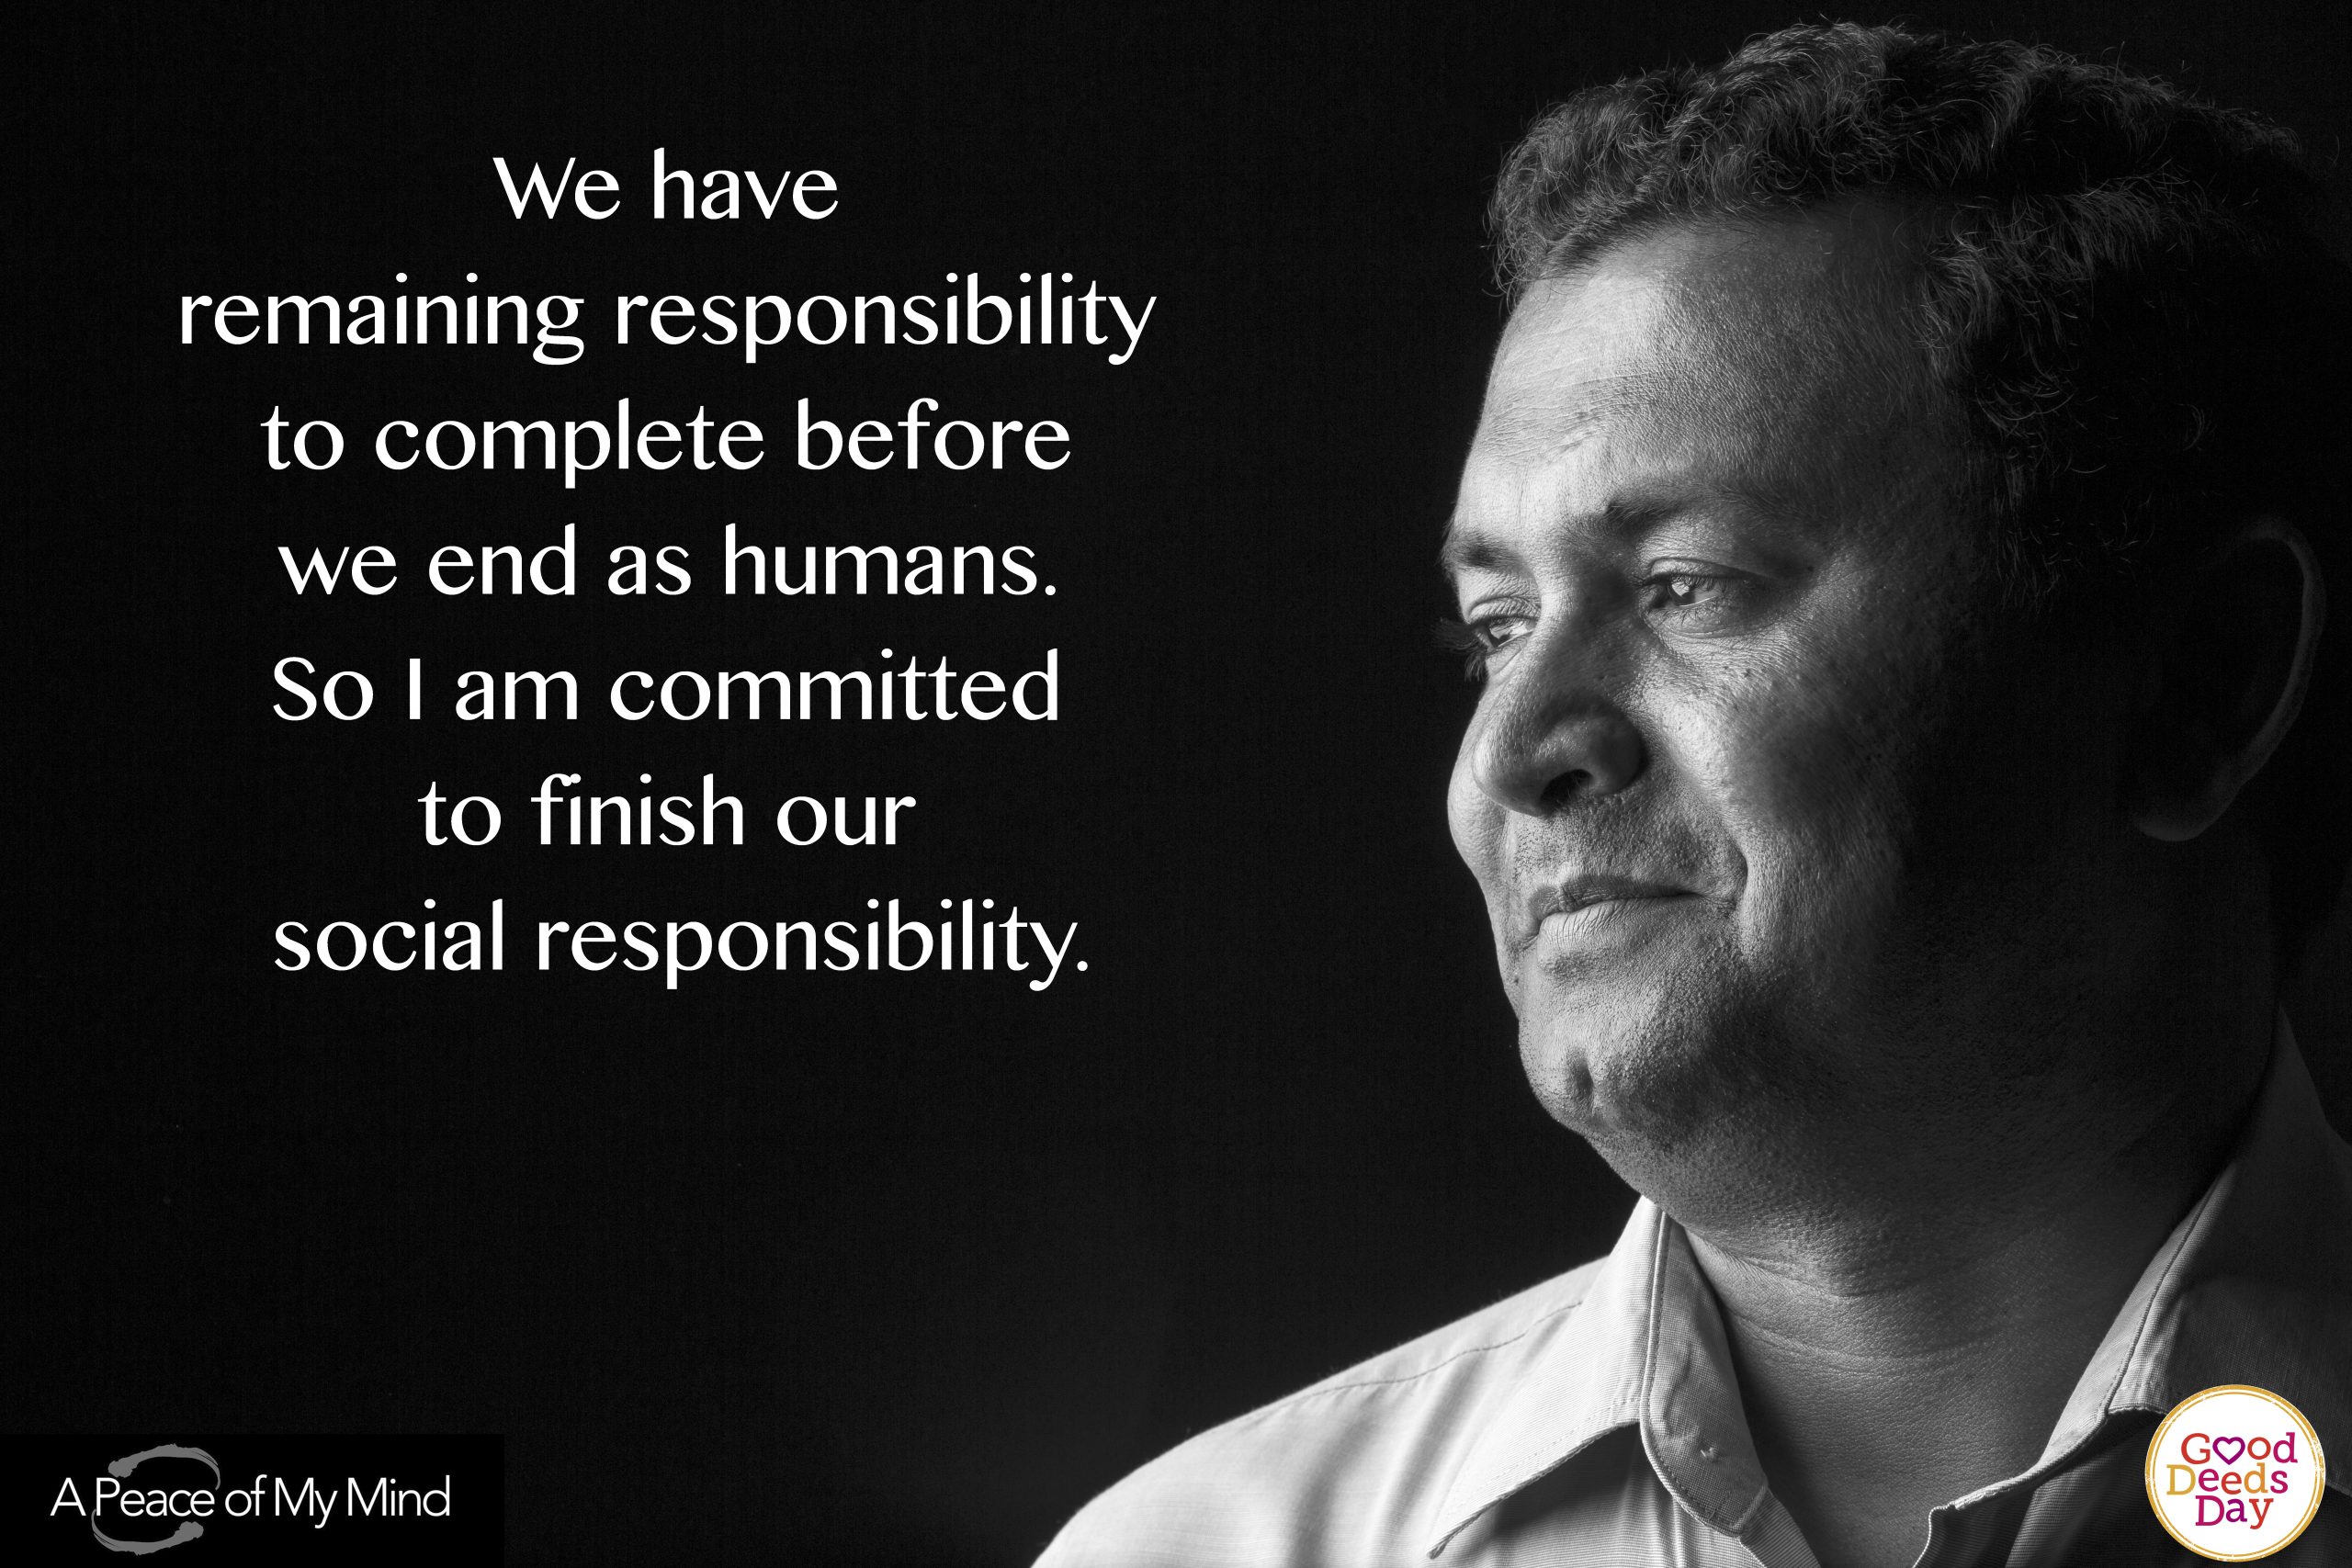 We have remaining responsibility to compete before we end as humans. So I am committed to finish our social responsibility.